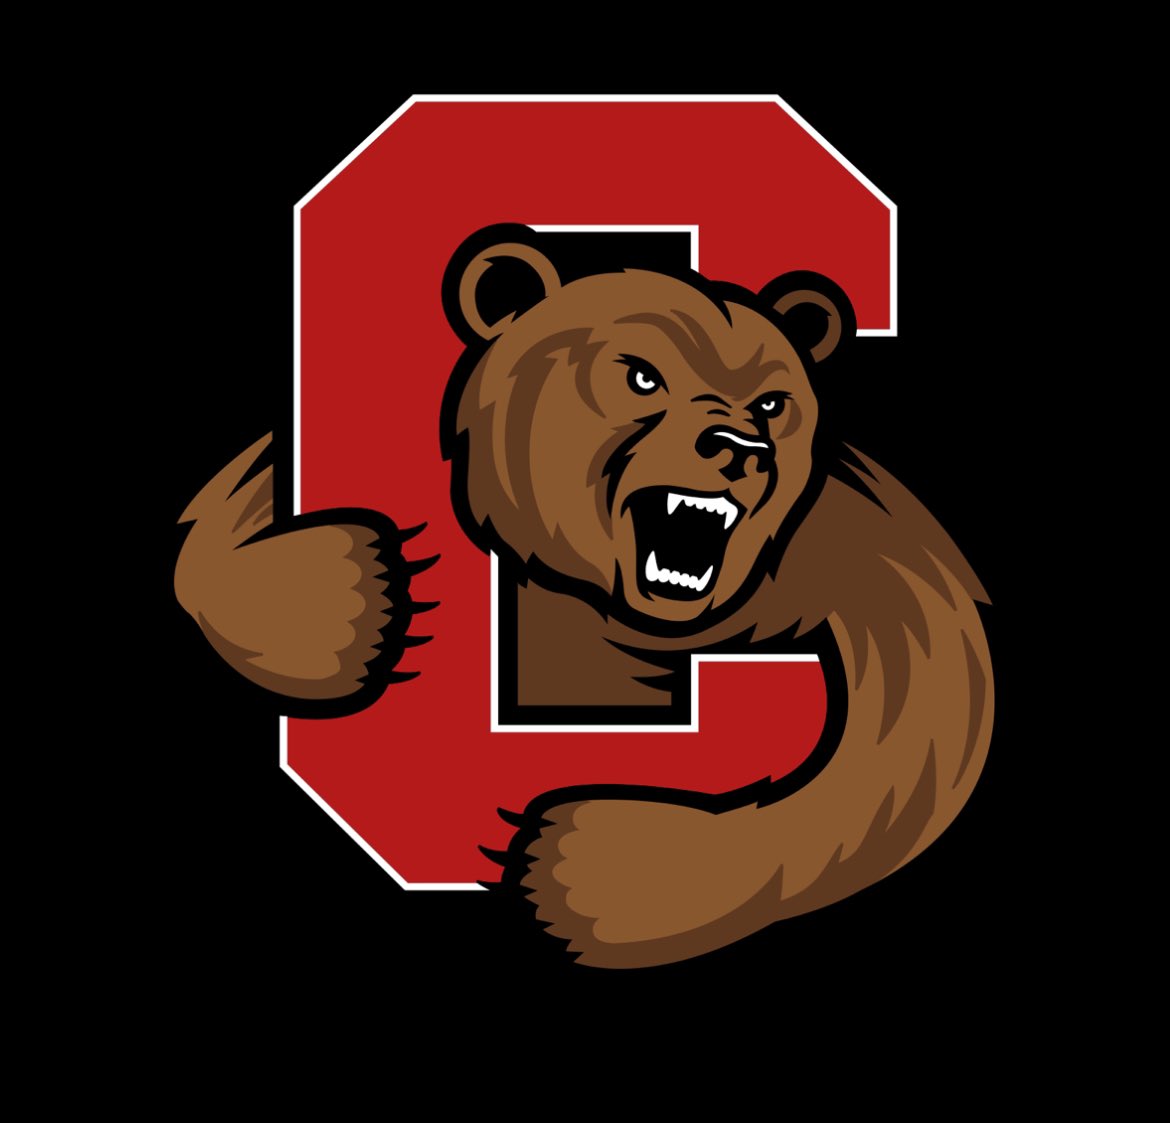 #AGTG After a great conversation with @CoachJDittman58, I am blessed to receive my 5th D1 offer from Cornell University. #GoBigRed❤️ @HuskieFB @HuskieStrength @EDGYTIM @RivalsPapiClint @AllenTrieu @SWiltfong247 @Stumpf_Brian